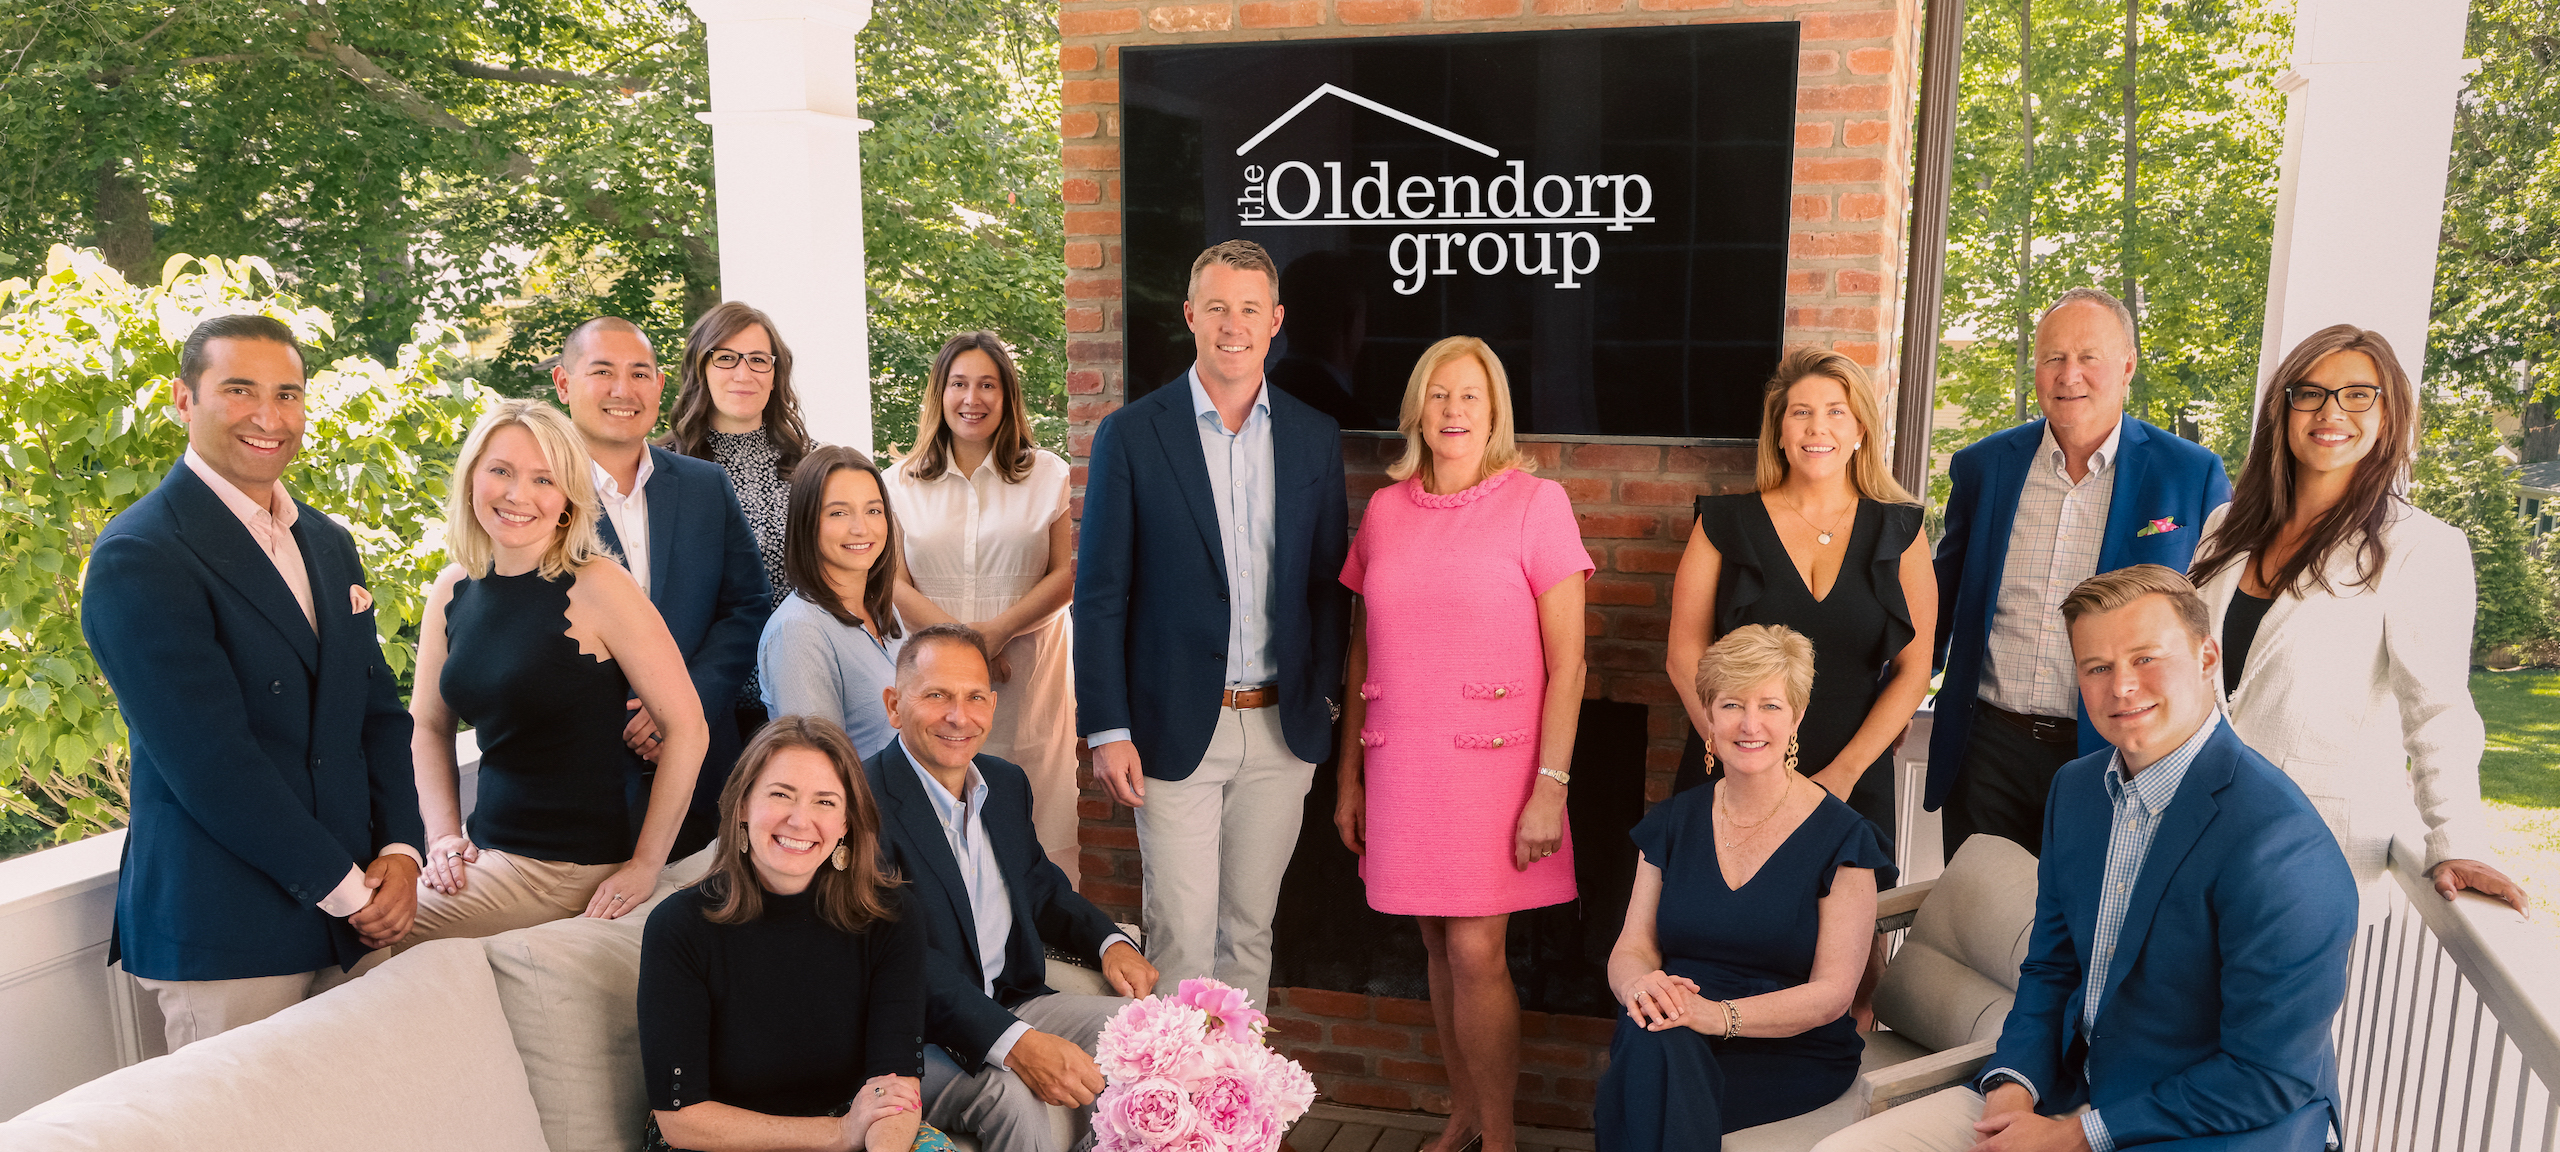 The Oldendorp Group Realtors of Compass NJ. View all homes for sale in Madison, Summit and Chatham NJ